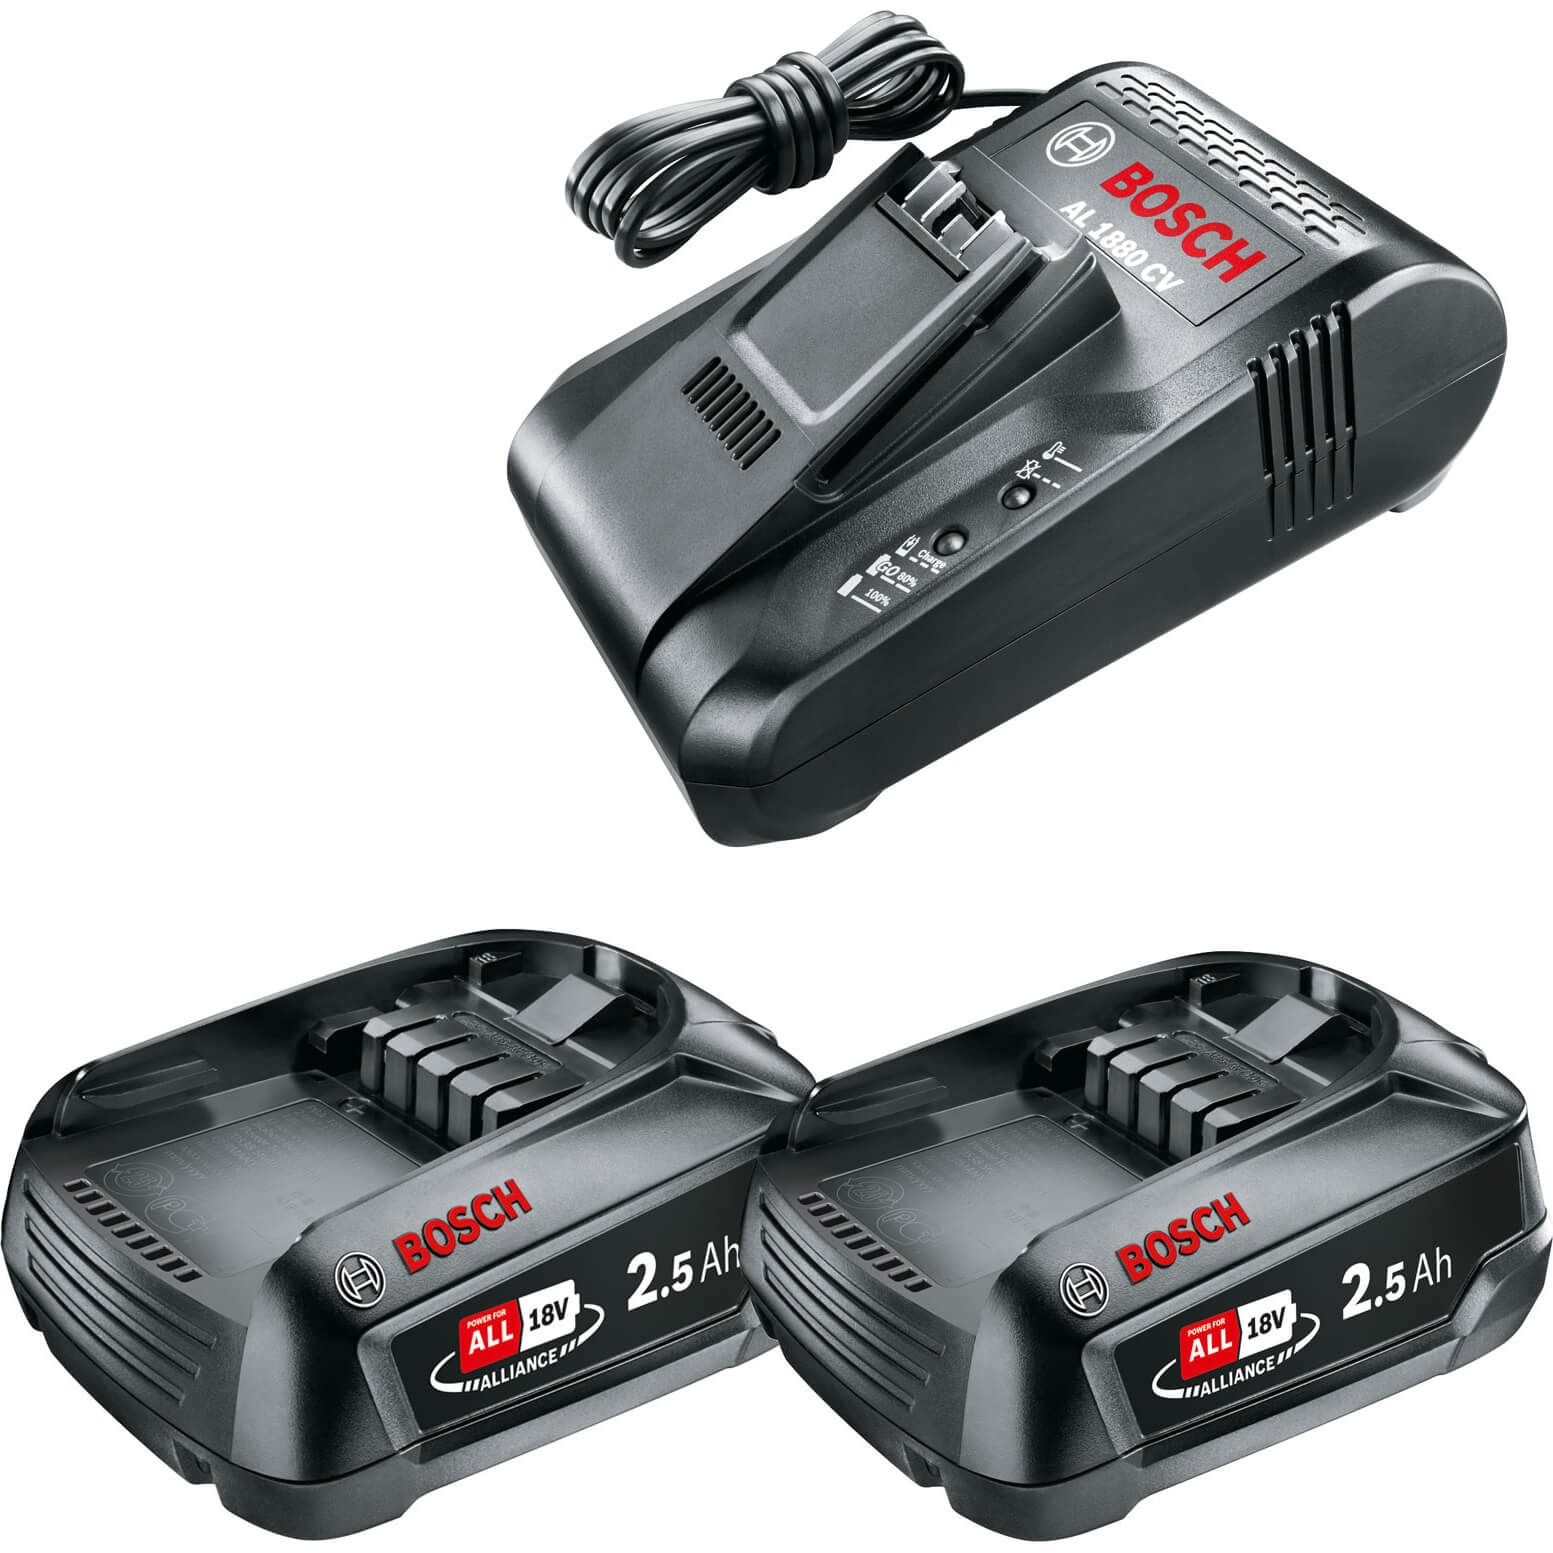 Photo of Bosch Genuine Power4all 18v Cordless Li-ion Twin Battery 2.5ah And 8a Super Fast Charger Set 2.5ah